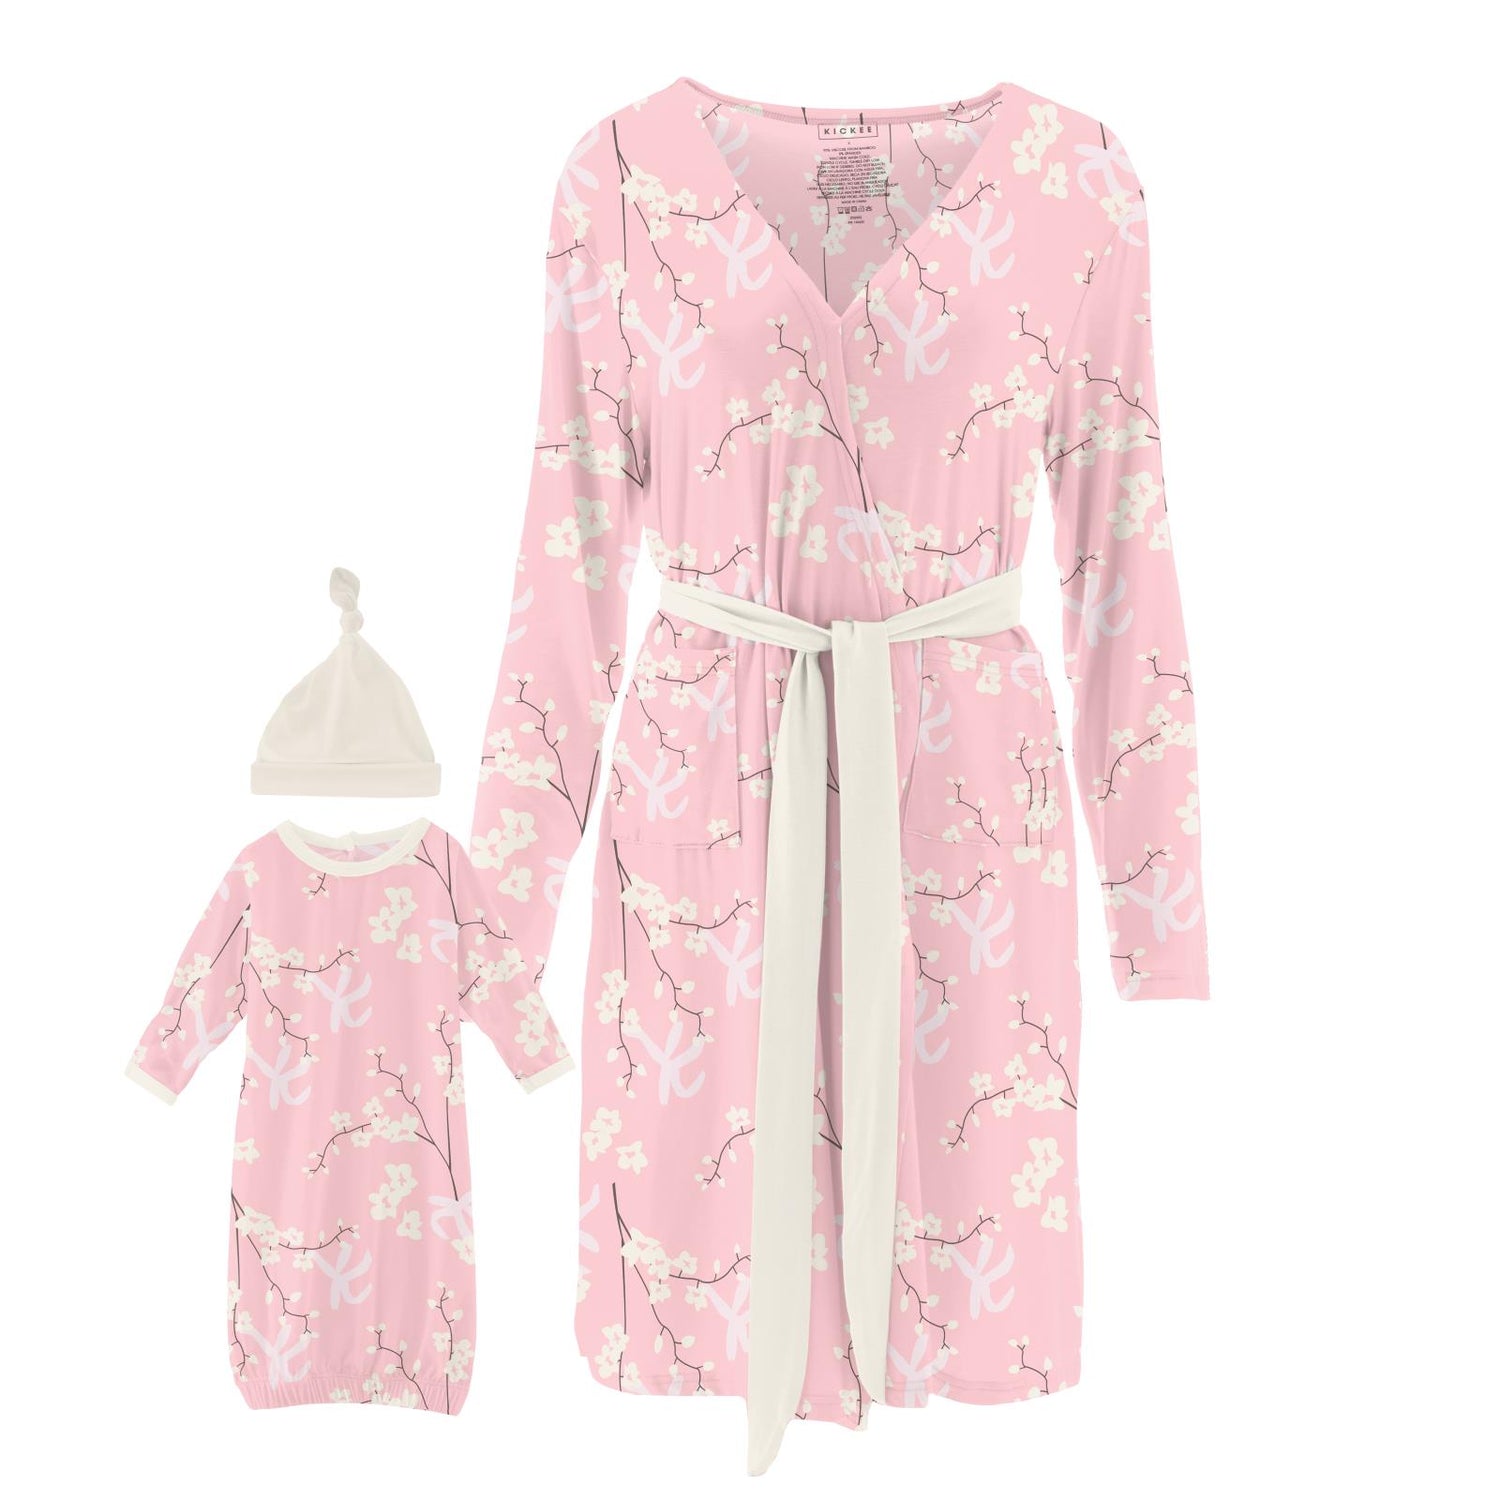 Women's Print Maternity/Nursing Robe & Layette Gown Set in Lotus Orchid Print